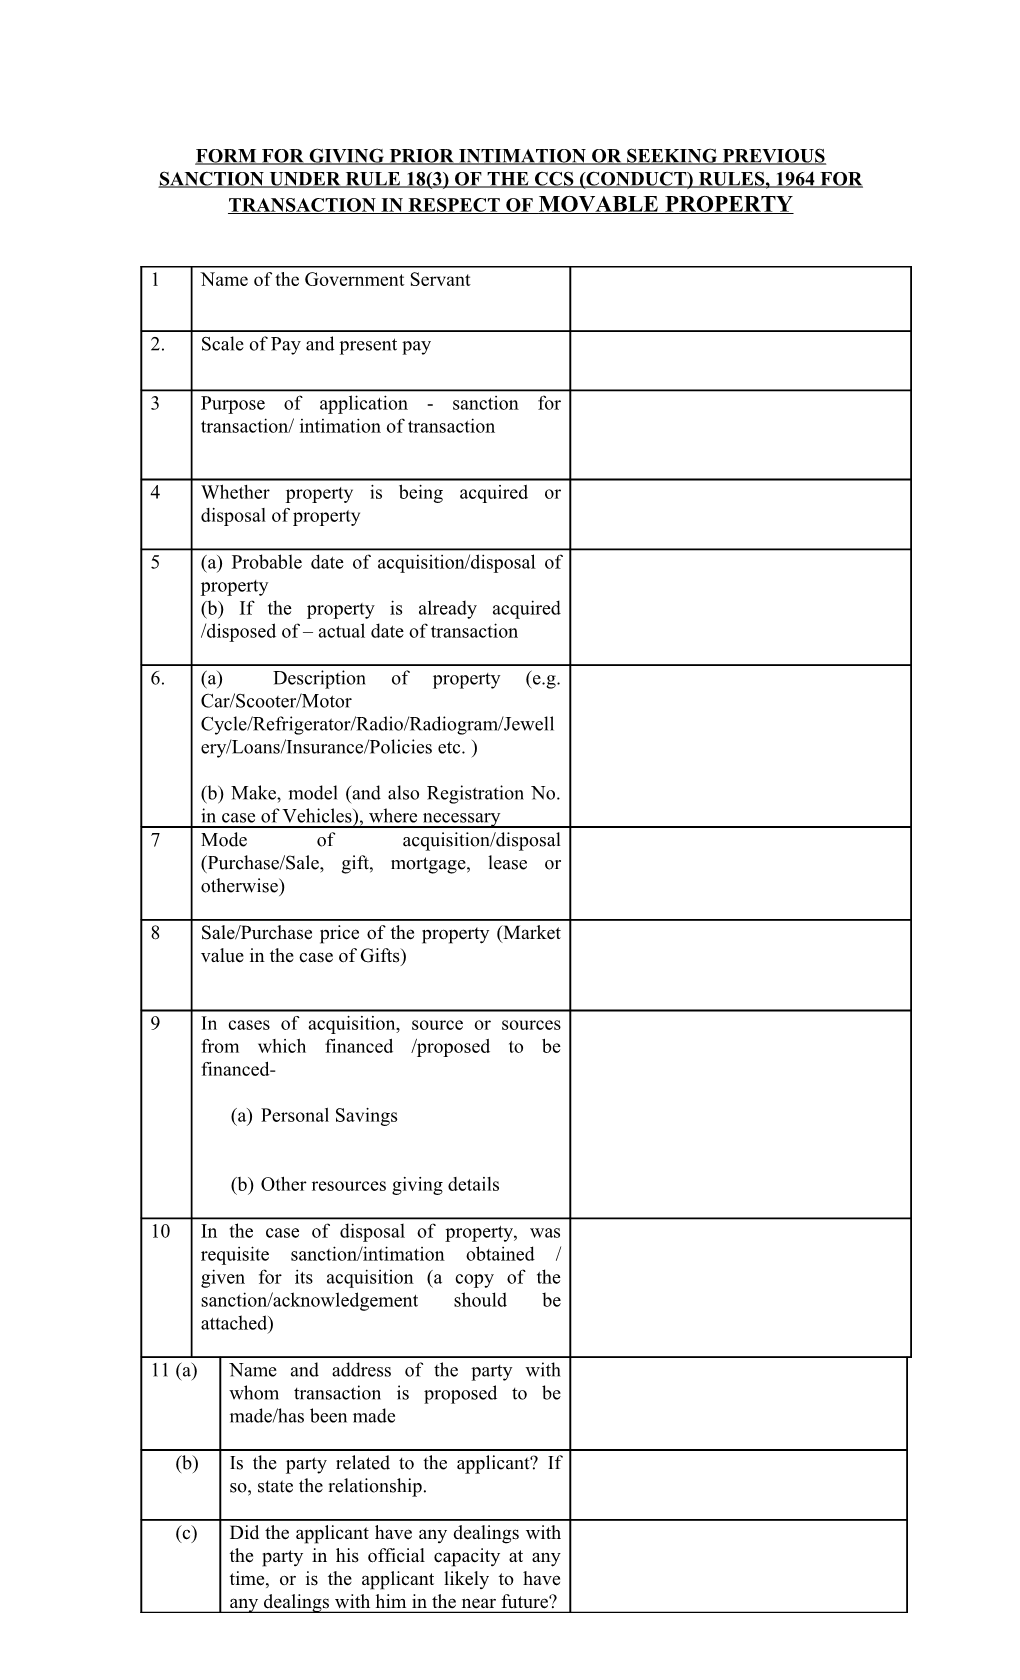 Form for Giving Prior Intimation Or Seeking Previous Sanction Under Rule 18(2) of the Ccs